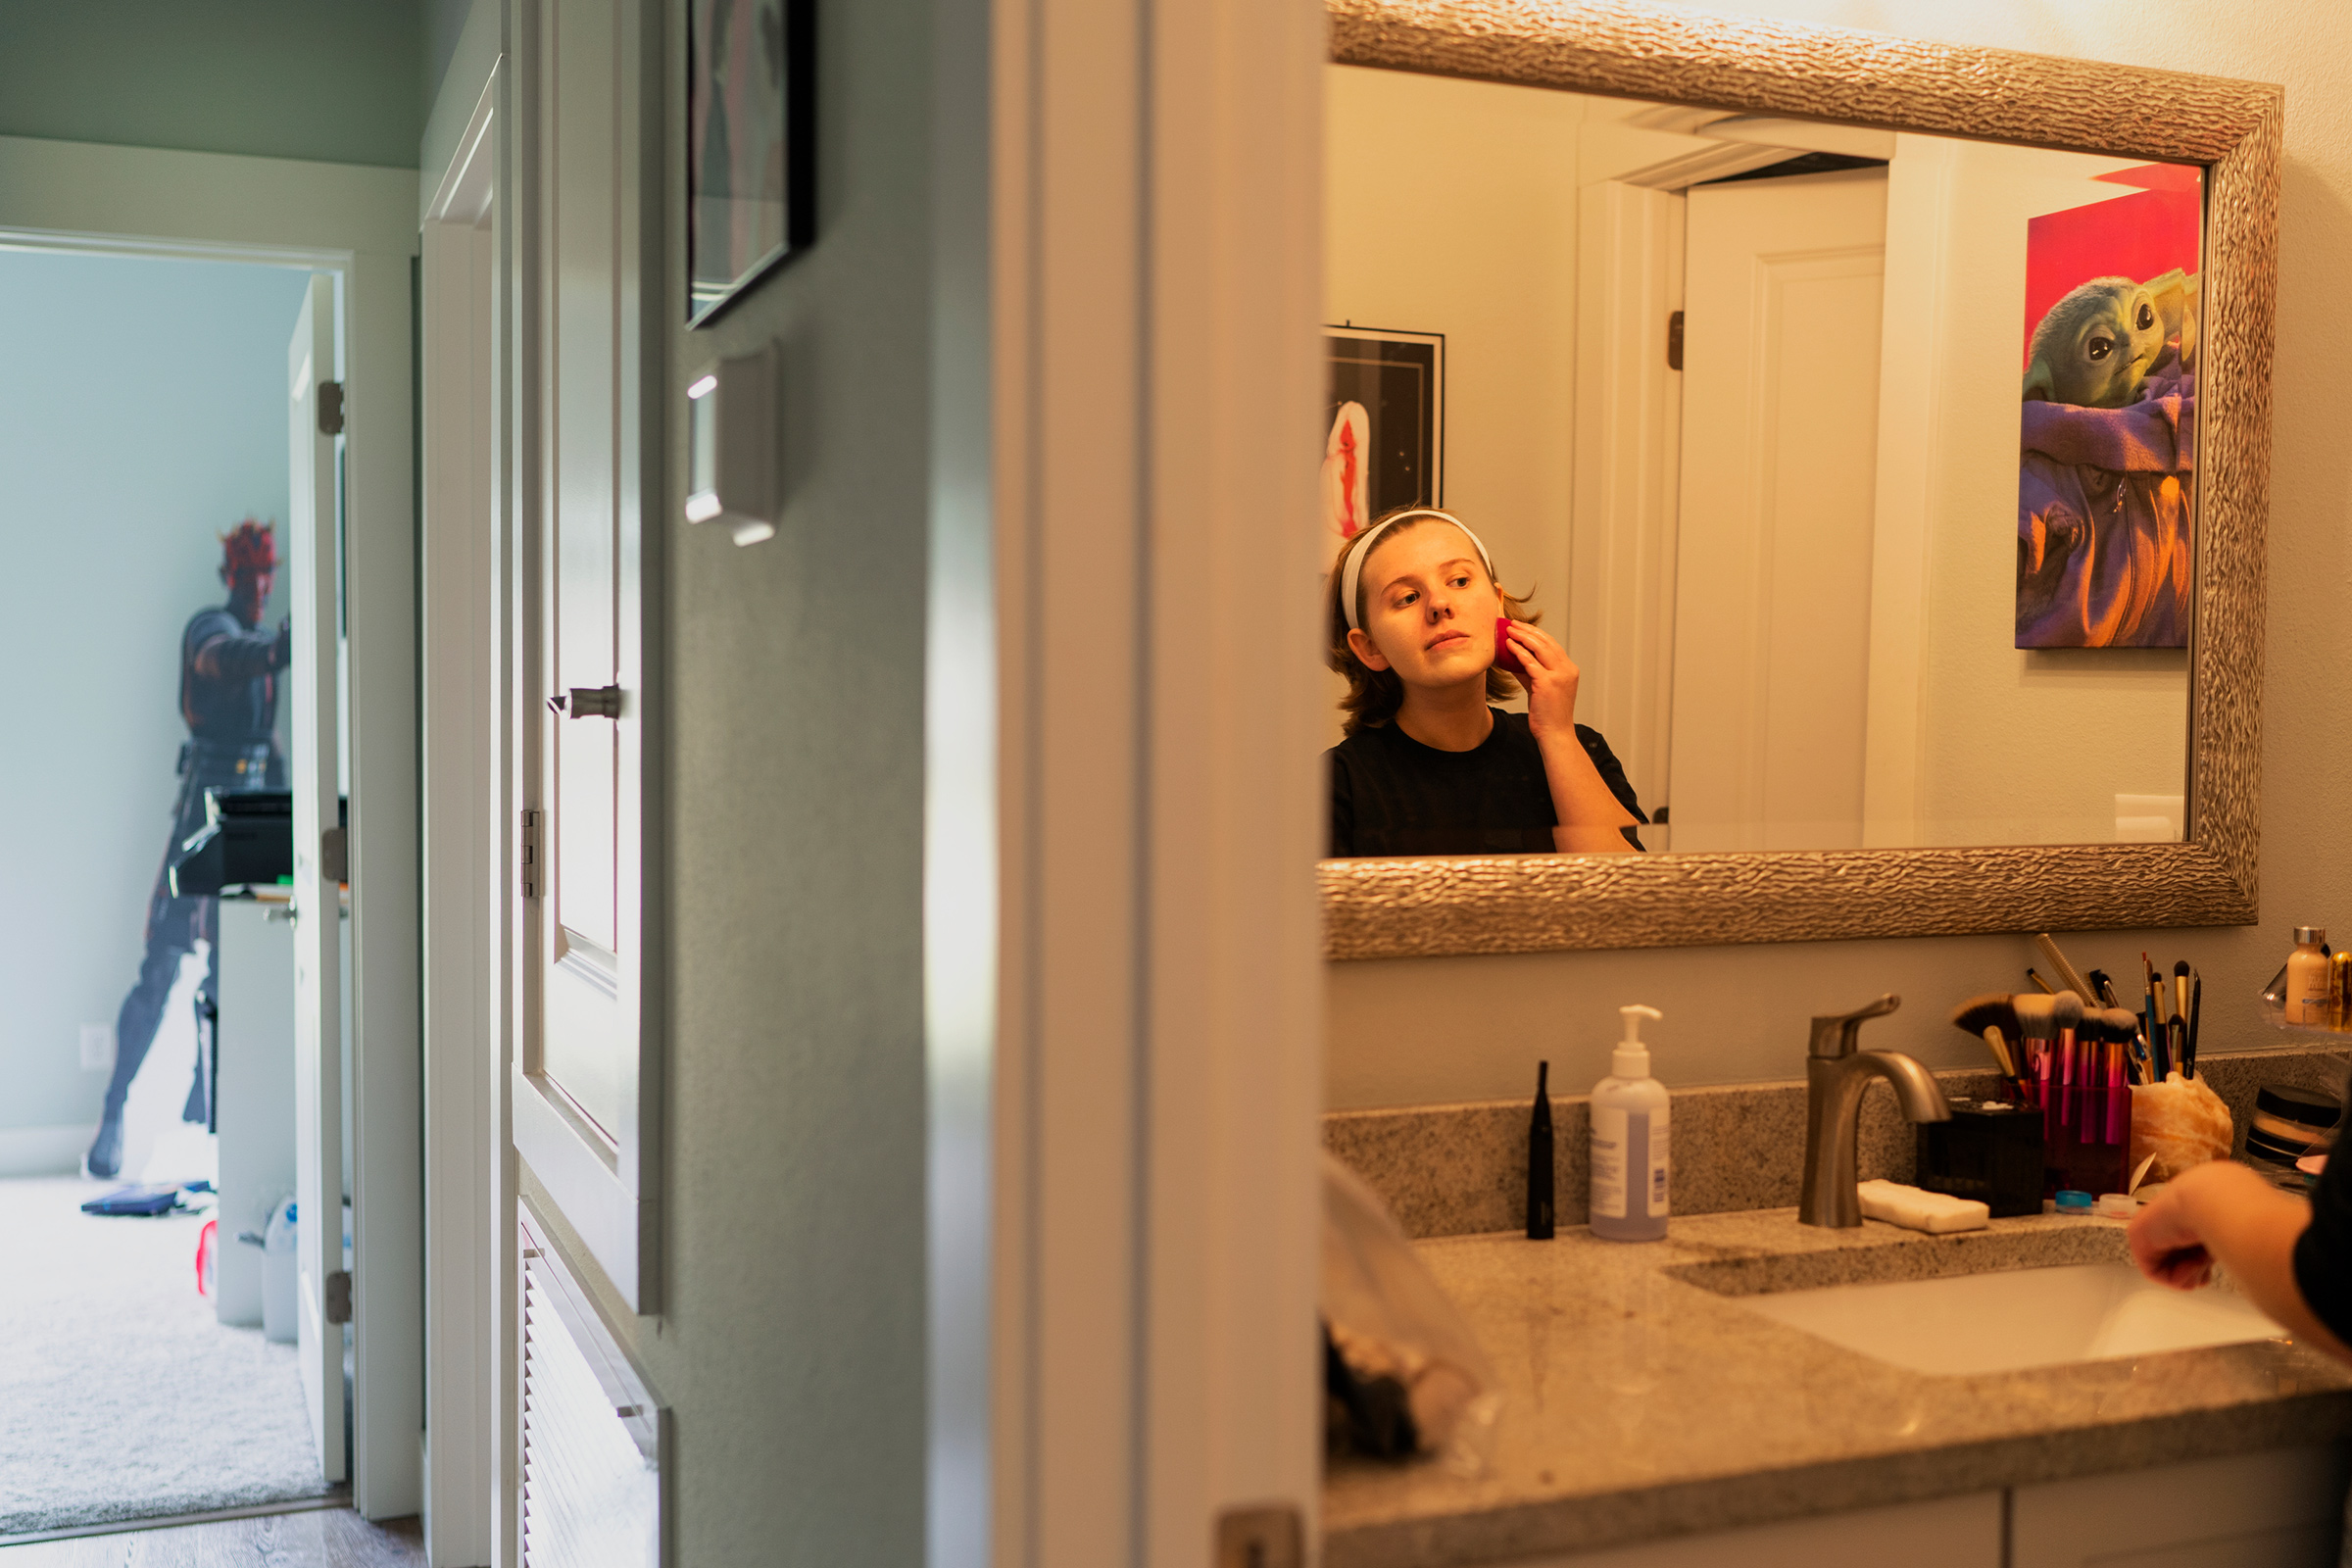 "I wake up and I put on makeup and I wear a stupid costume and make fun content. You can decide if you want to be a persona—or if you just want to be yourself,” Savannah says. (Annie Flanagan for TIME)